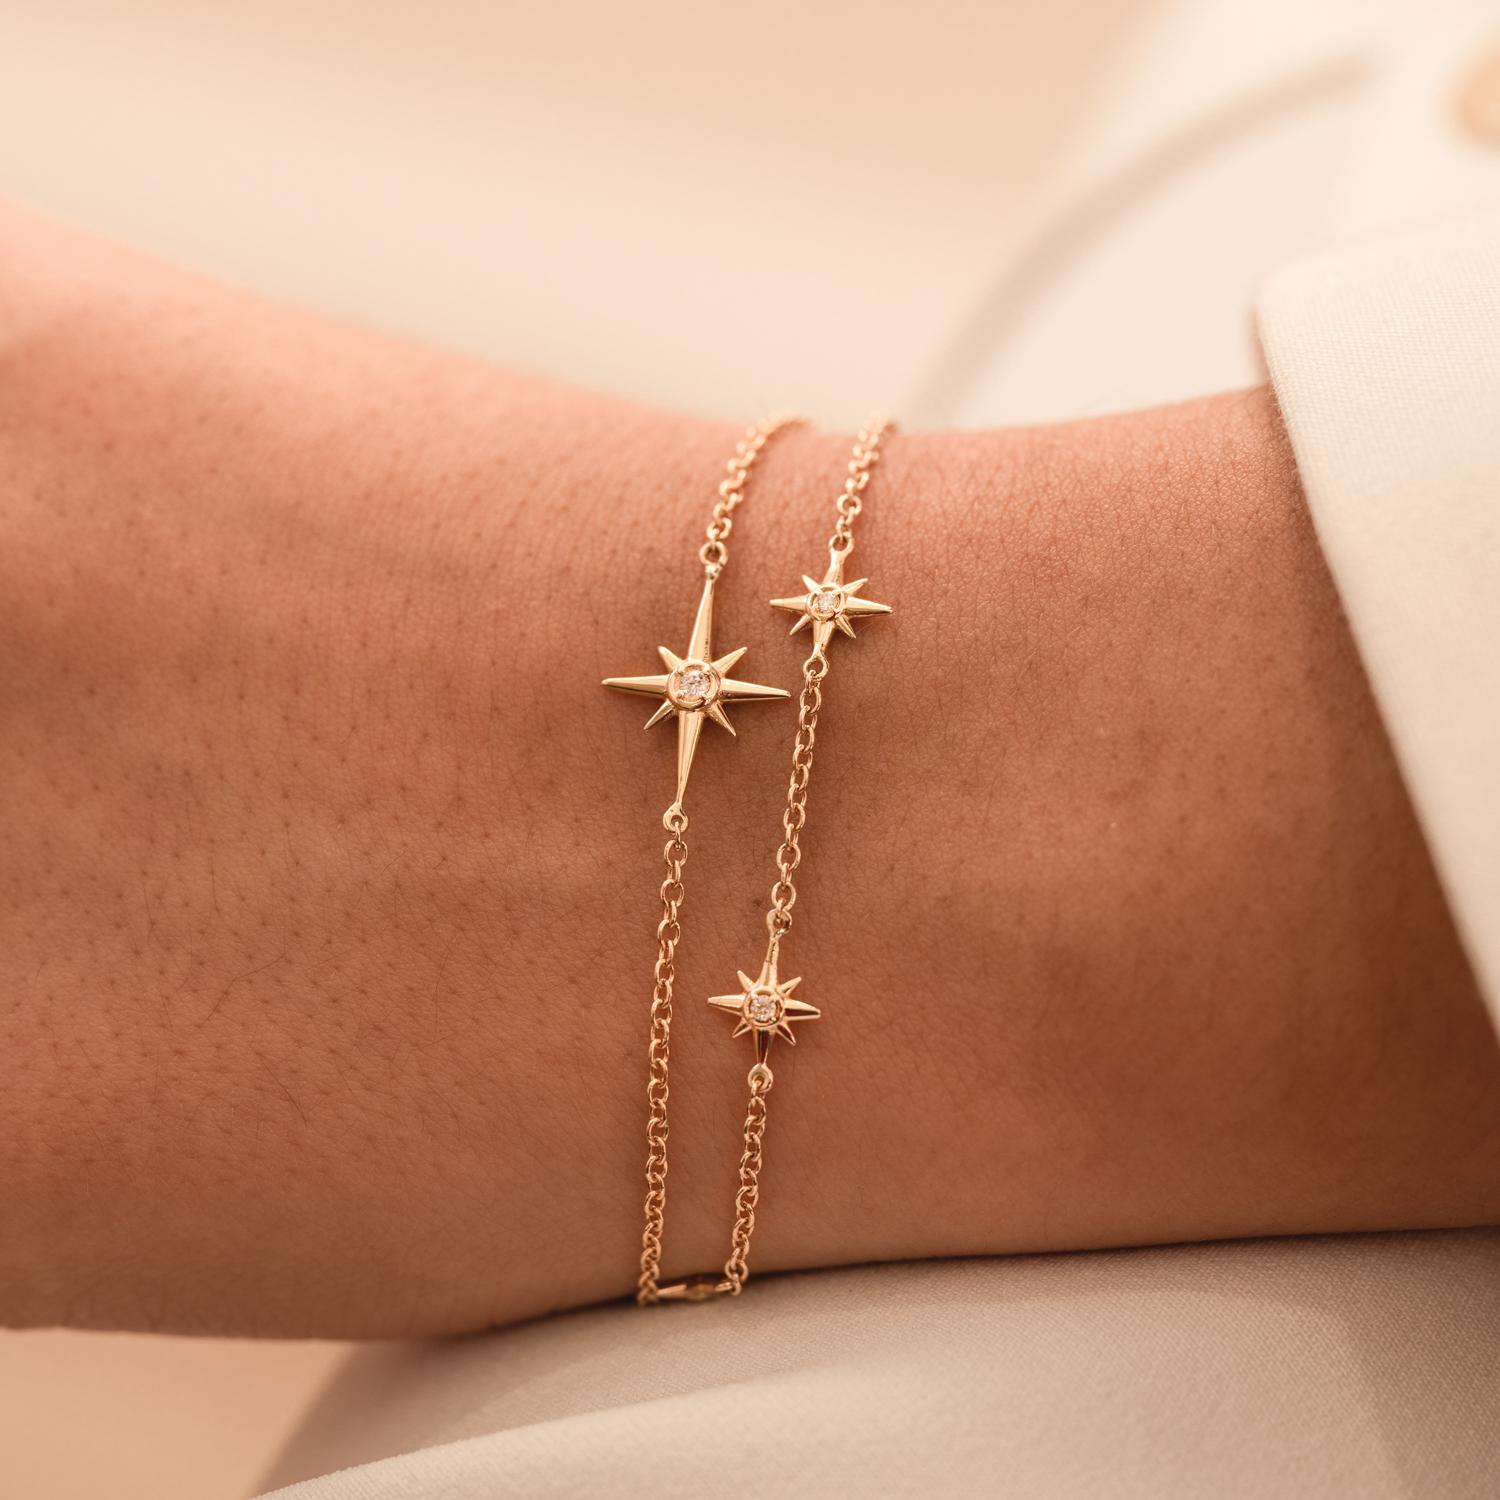 Our fine North Star range is a new collection of 14k Gold and Diamond guiding stars inspired by our ever-popular 'True North' Talisman designs.

This delicate 14k yellow gold bracelet features five diamond set Stars. Suspended on fine gold chain,